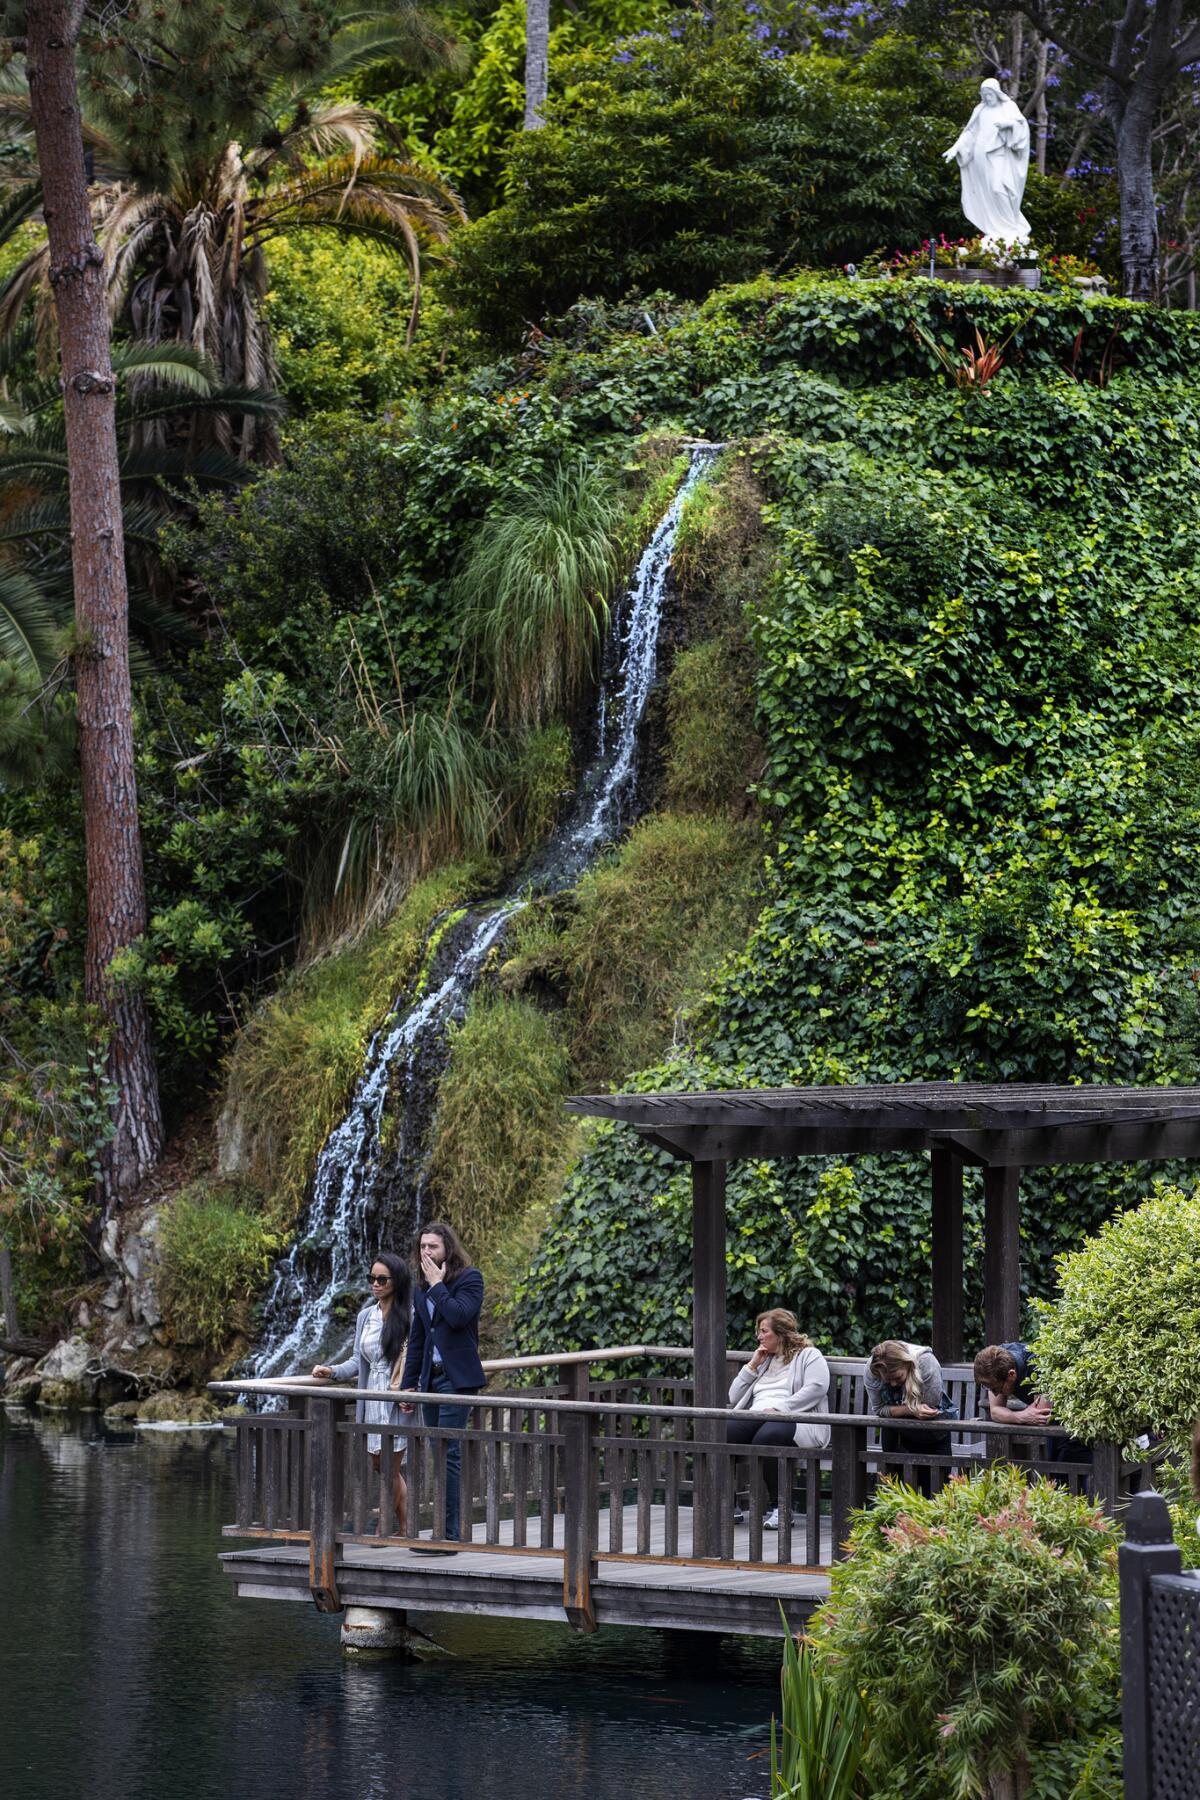 Members of the public enjoy the solace of the lake in the Meditation Gardens at the Lake Shrine Self Realization Fellowship silence retreat.